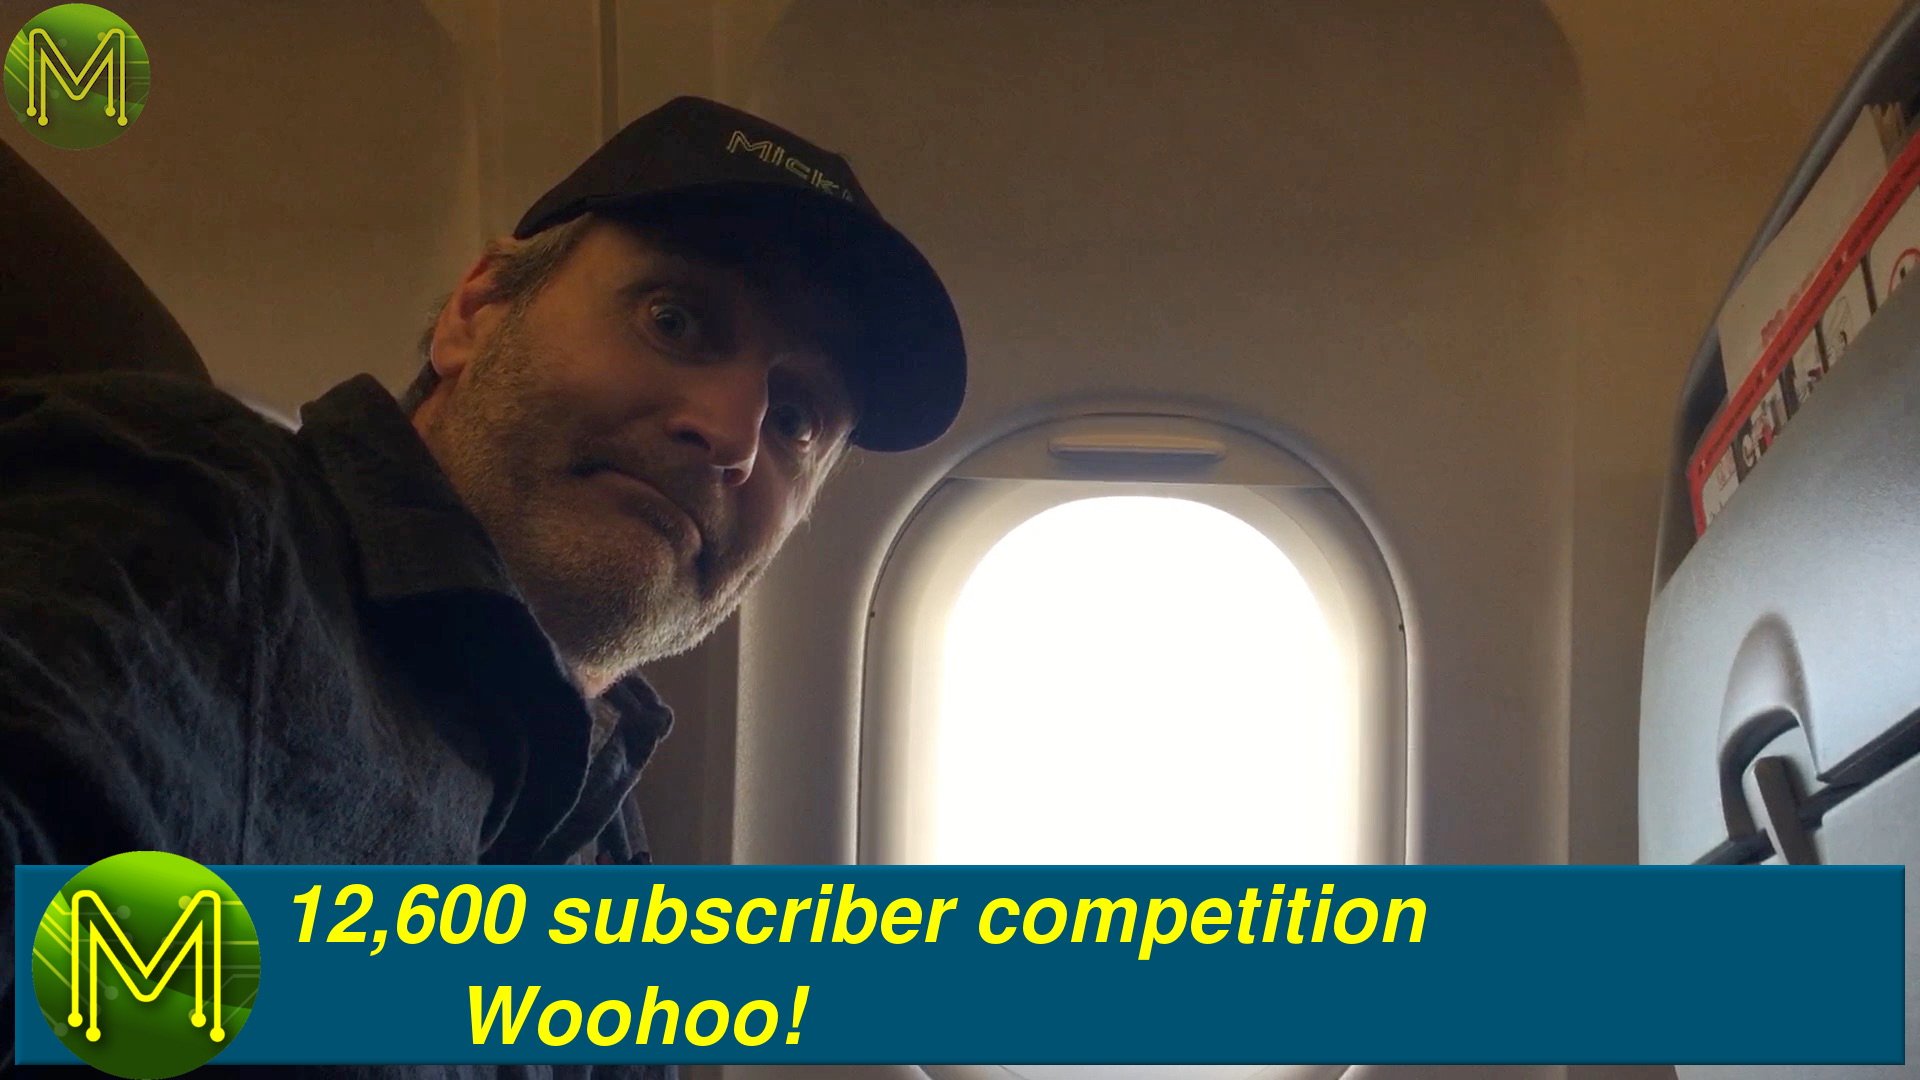 12,600 subscriber competition!